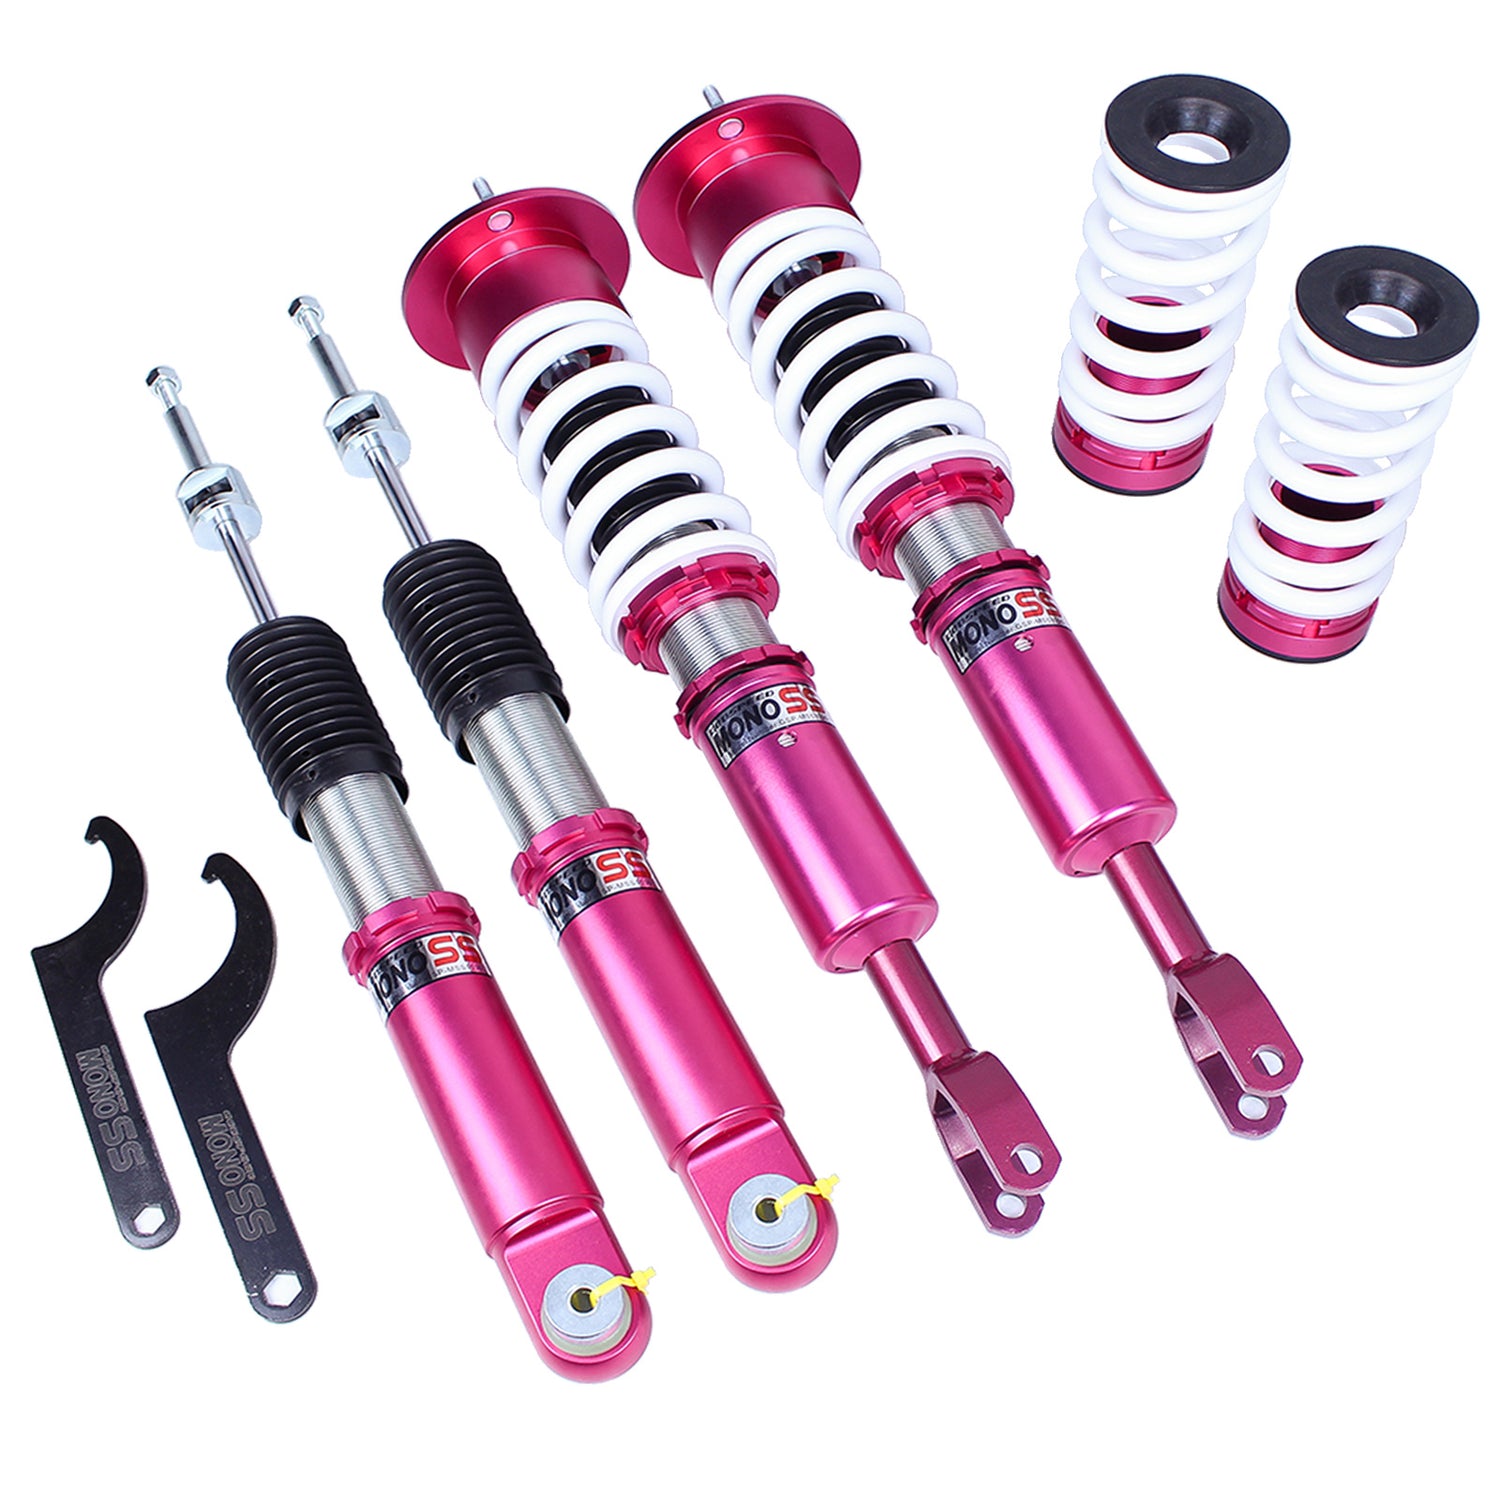 Godspeed MSS1030 MonoSS Coilover Lowering Kit, Fully Adjustable, Ride Height, Spring Tension And 16 Click Damping, Audi A6(C5) FWD 1997-04